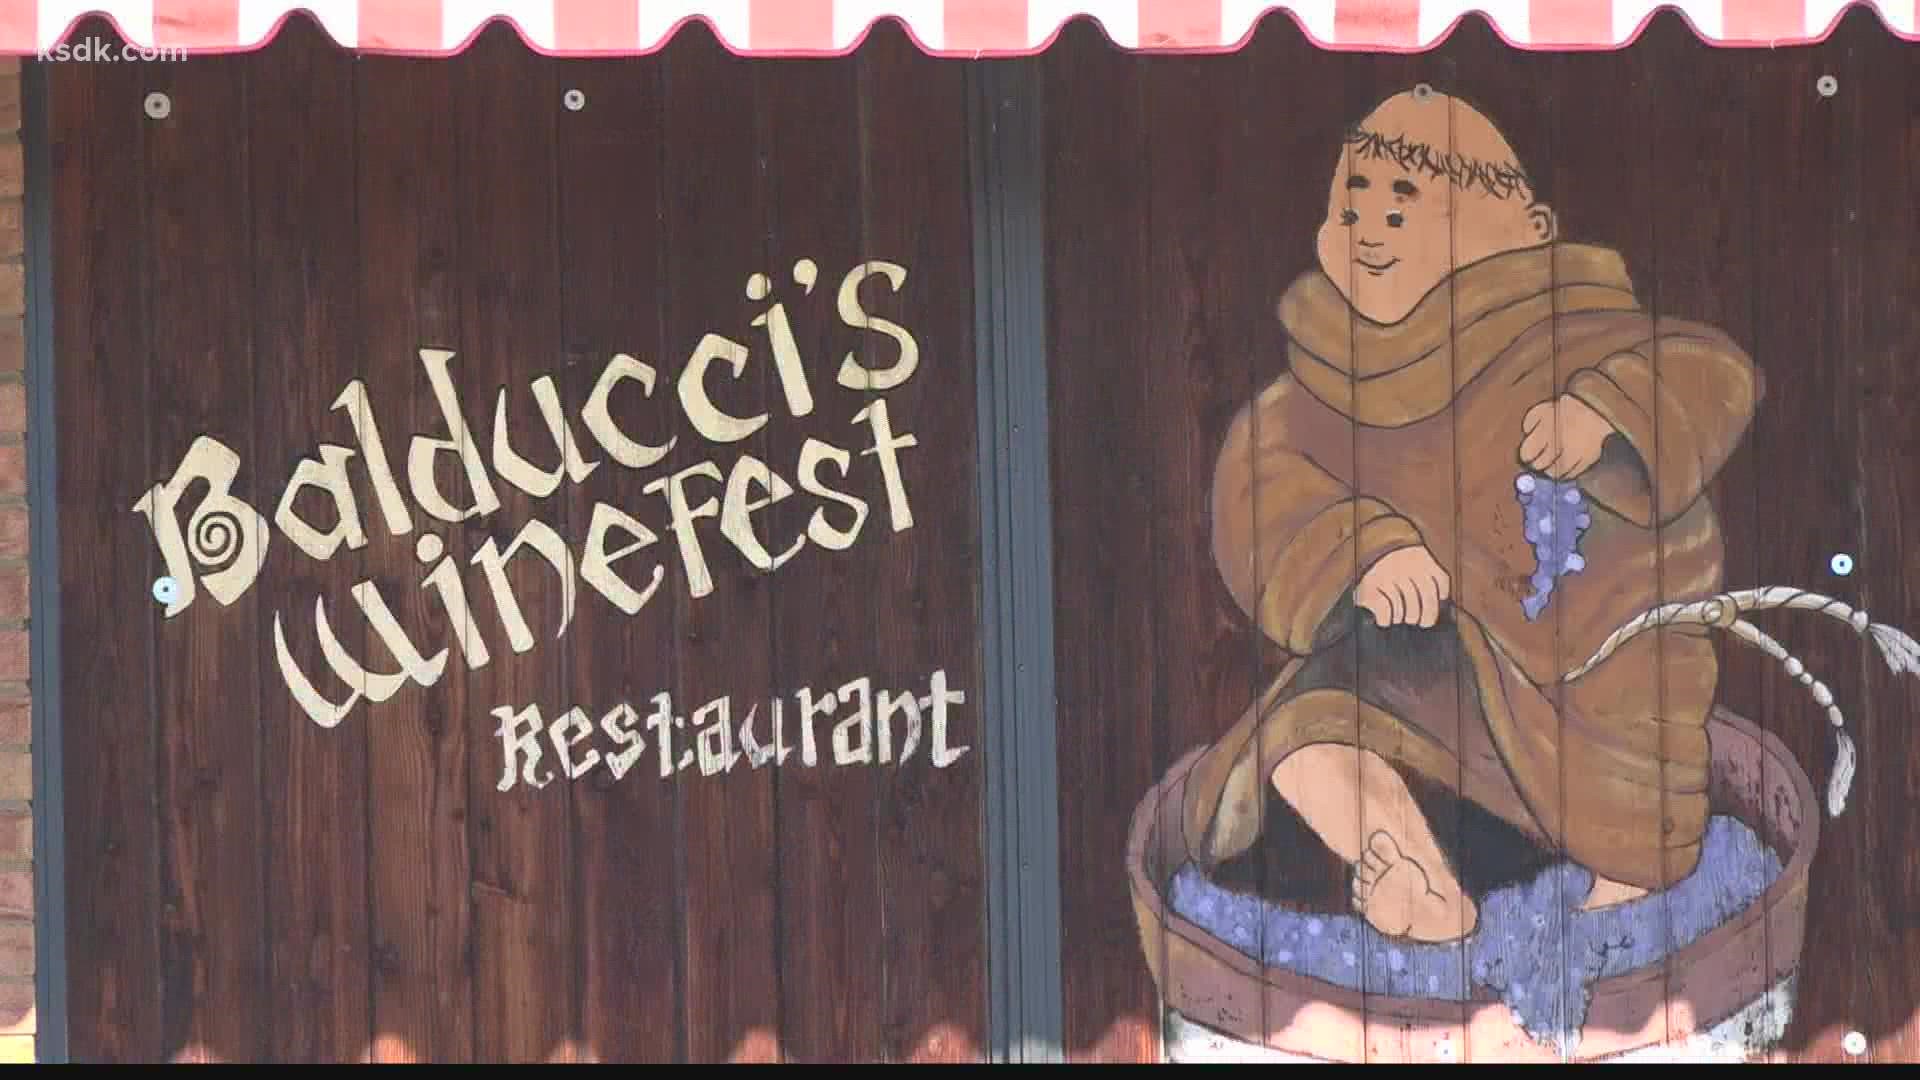 For more than 46 years, Balducci's has been serving Italian cuisine in Maryland Heights.